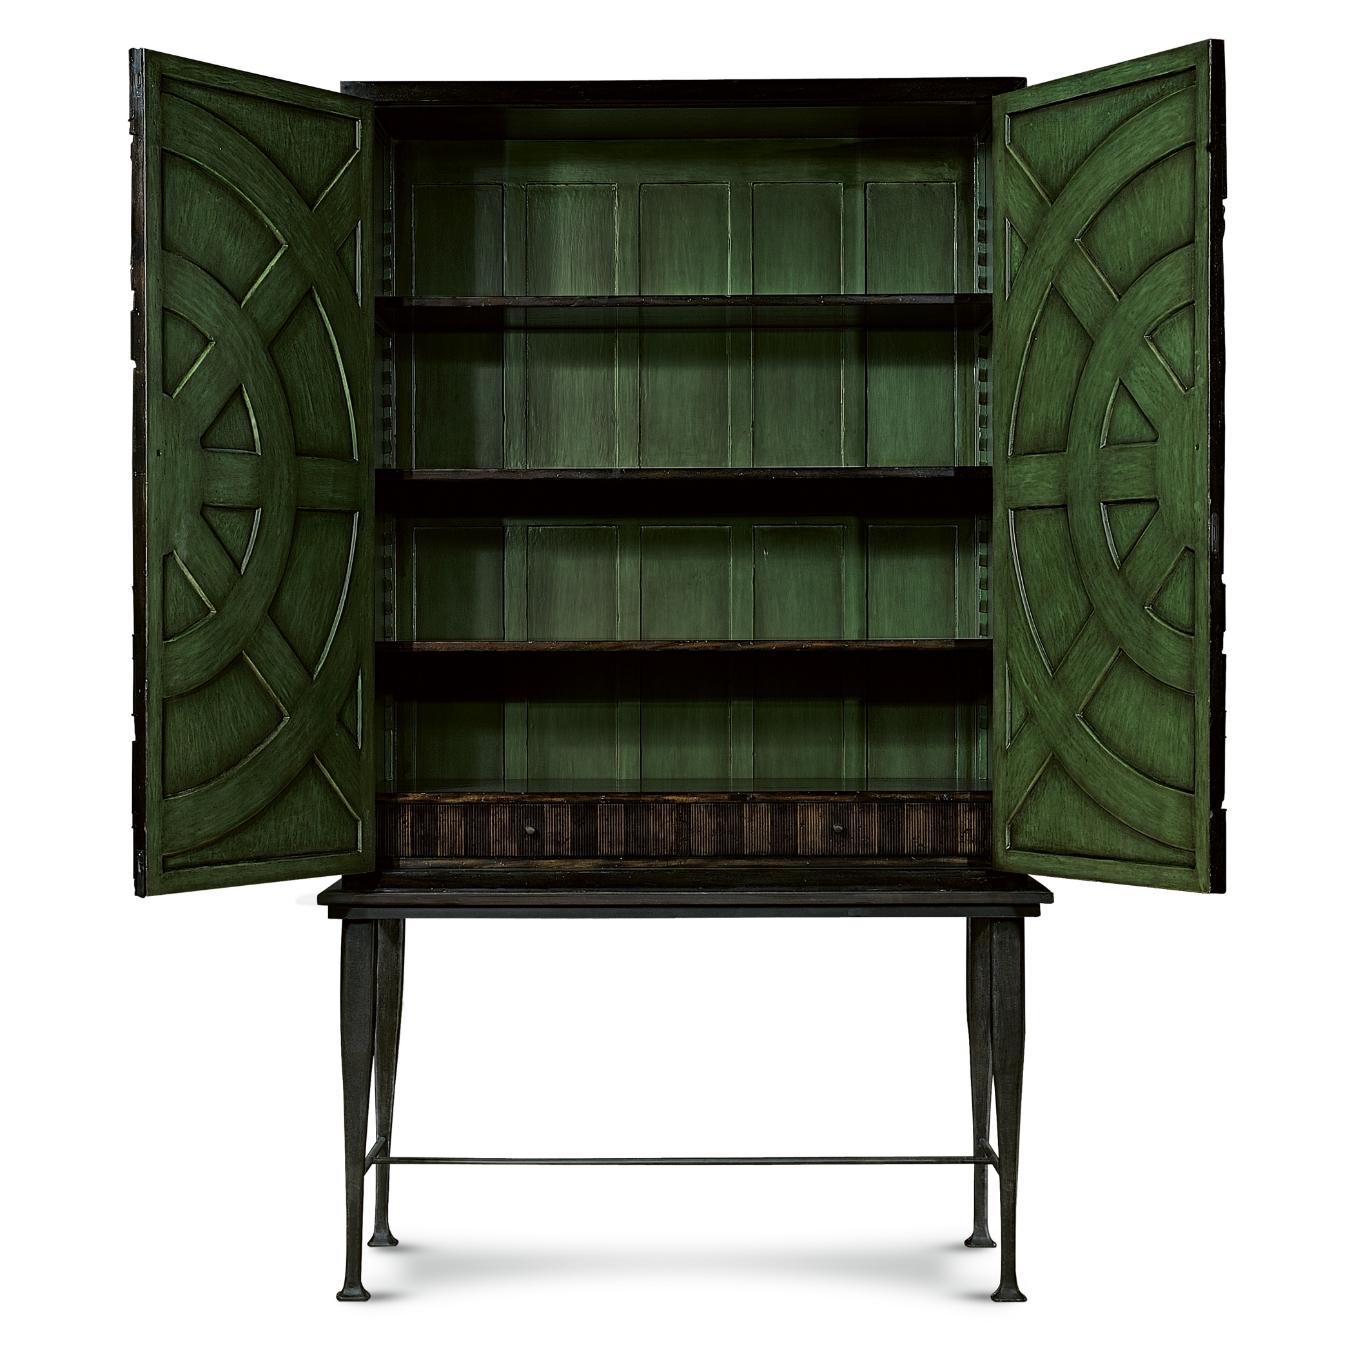 Inspired by a jet turbine, the Villiers armoire has 1300 hand-applied pieces that decorate its doors, giving it its emblematic textured finish. Its distinct iron base has been cast in a mold to get its tapered shape and it is forged on-site in our